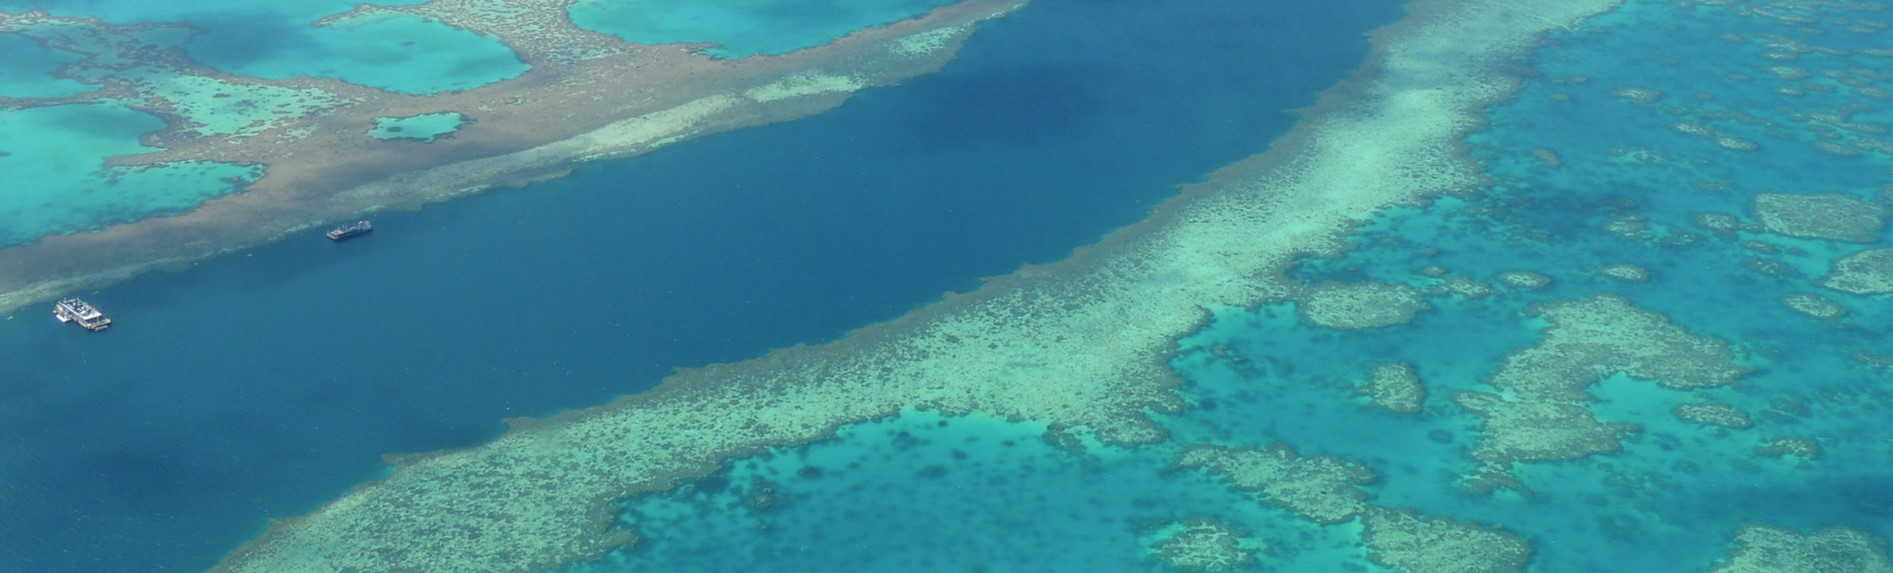 Great organisations saving the Great Barrier Reef!